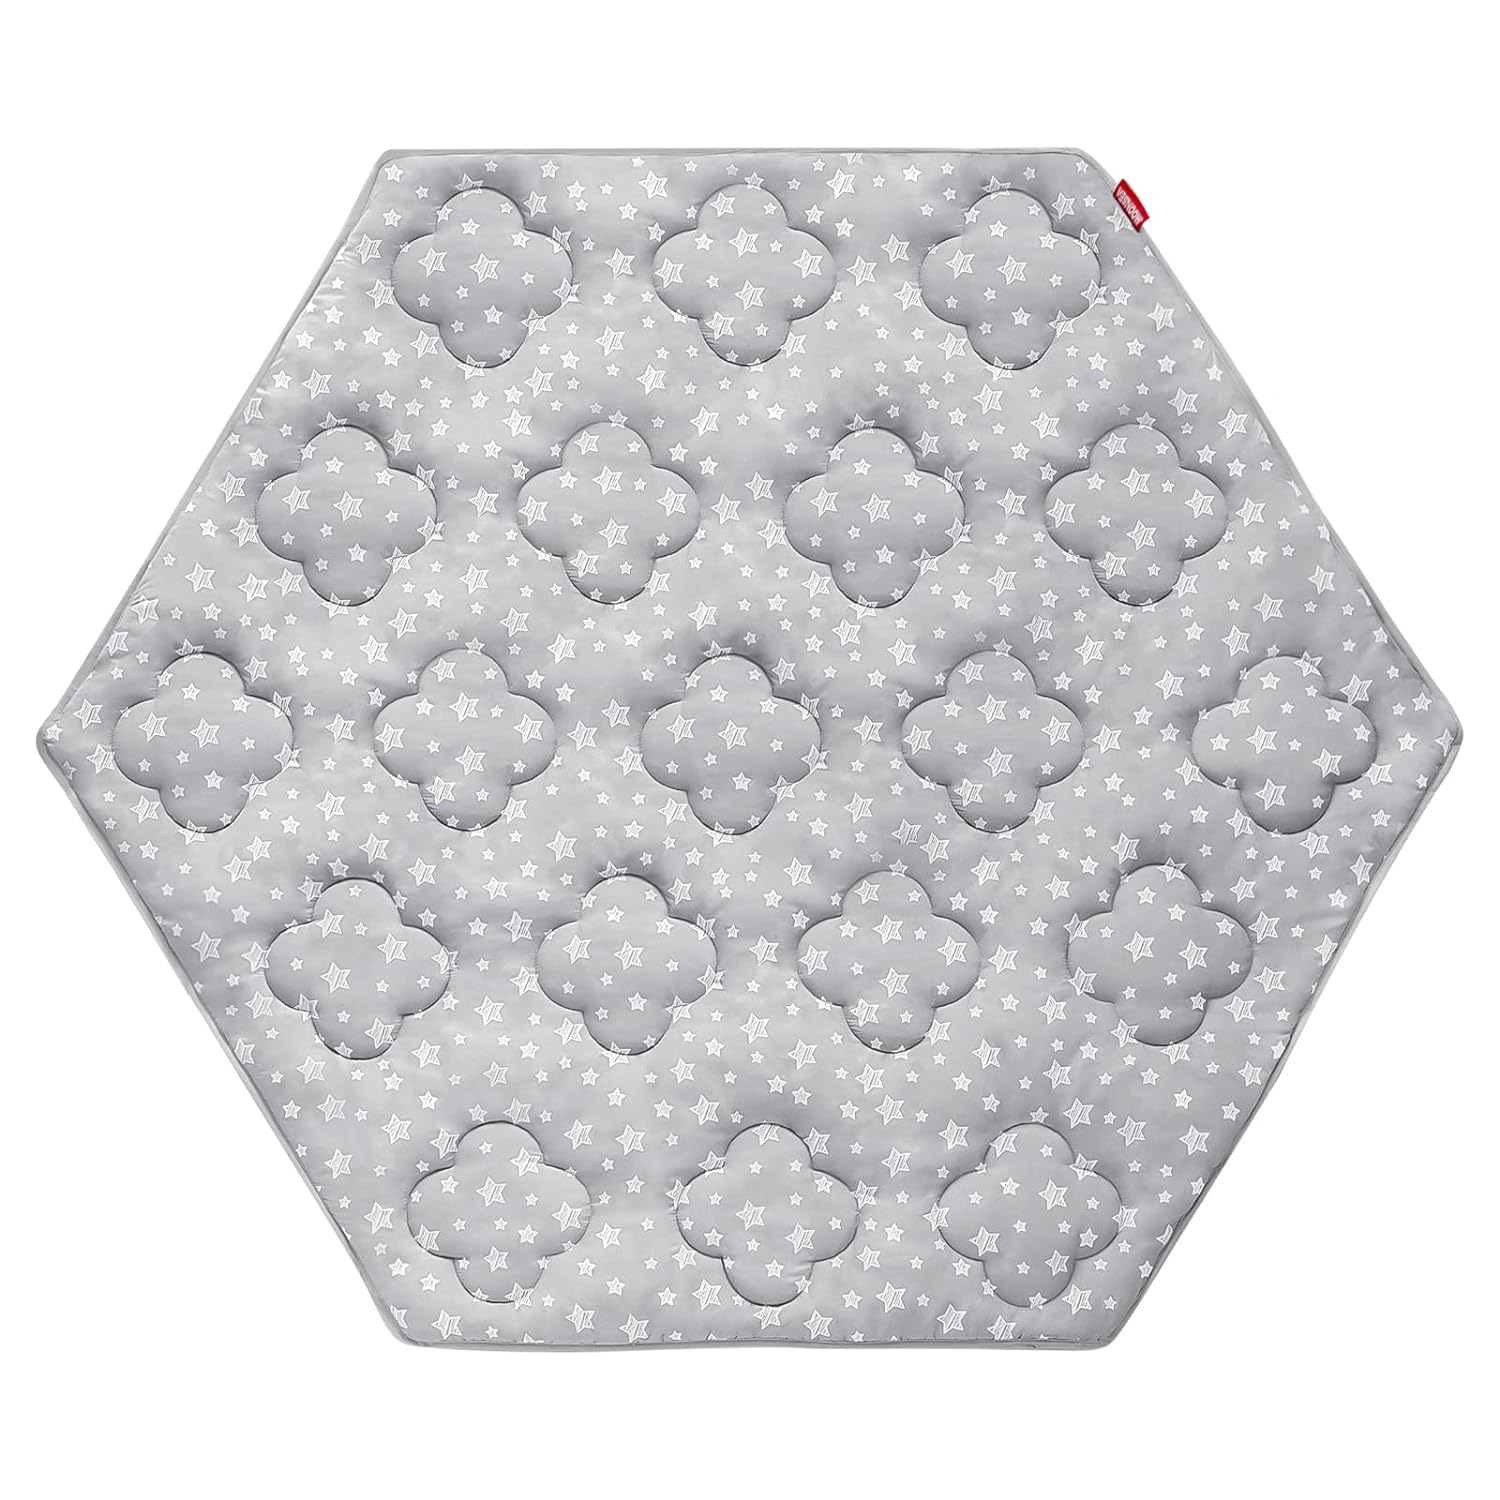 Baby Play Mat | Hexagon Playpen Mat - Extra Large Padded and Non Slip Activity Mat for Infant & Toddler - Moonsea Bedding